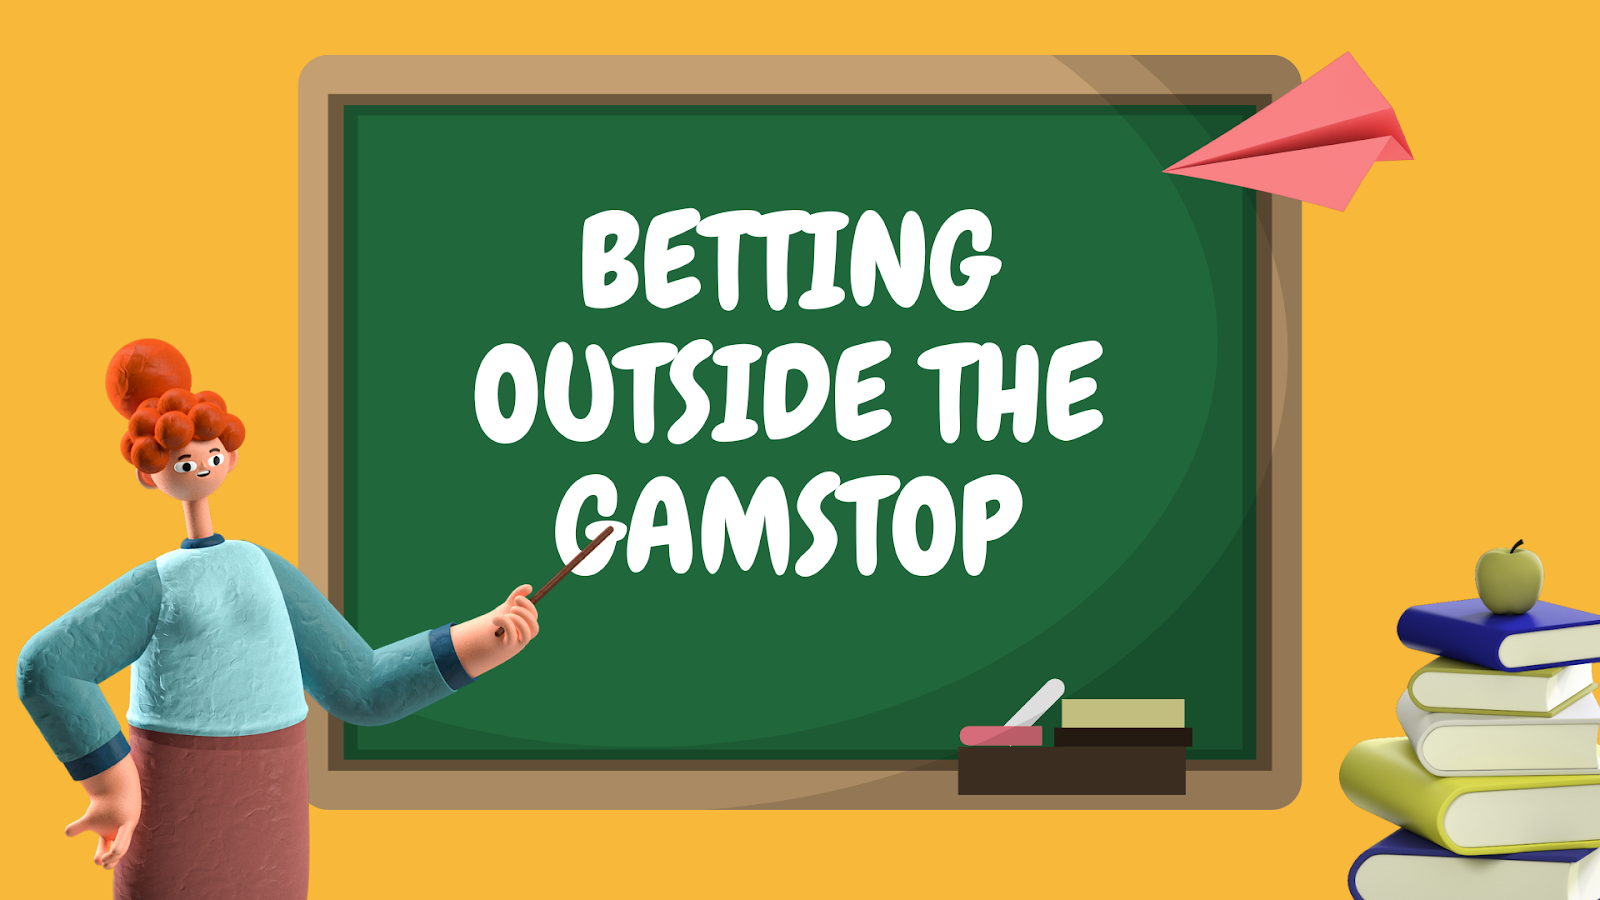 Betting Outside The Gamstop